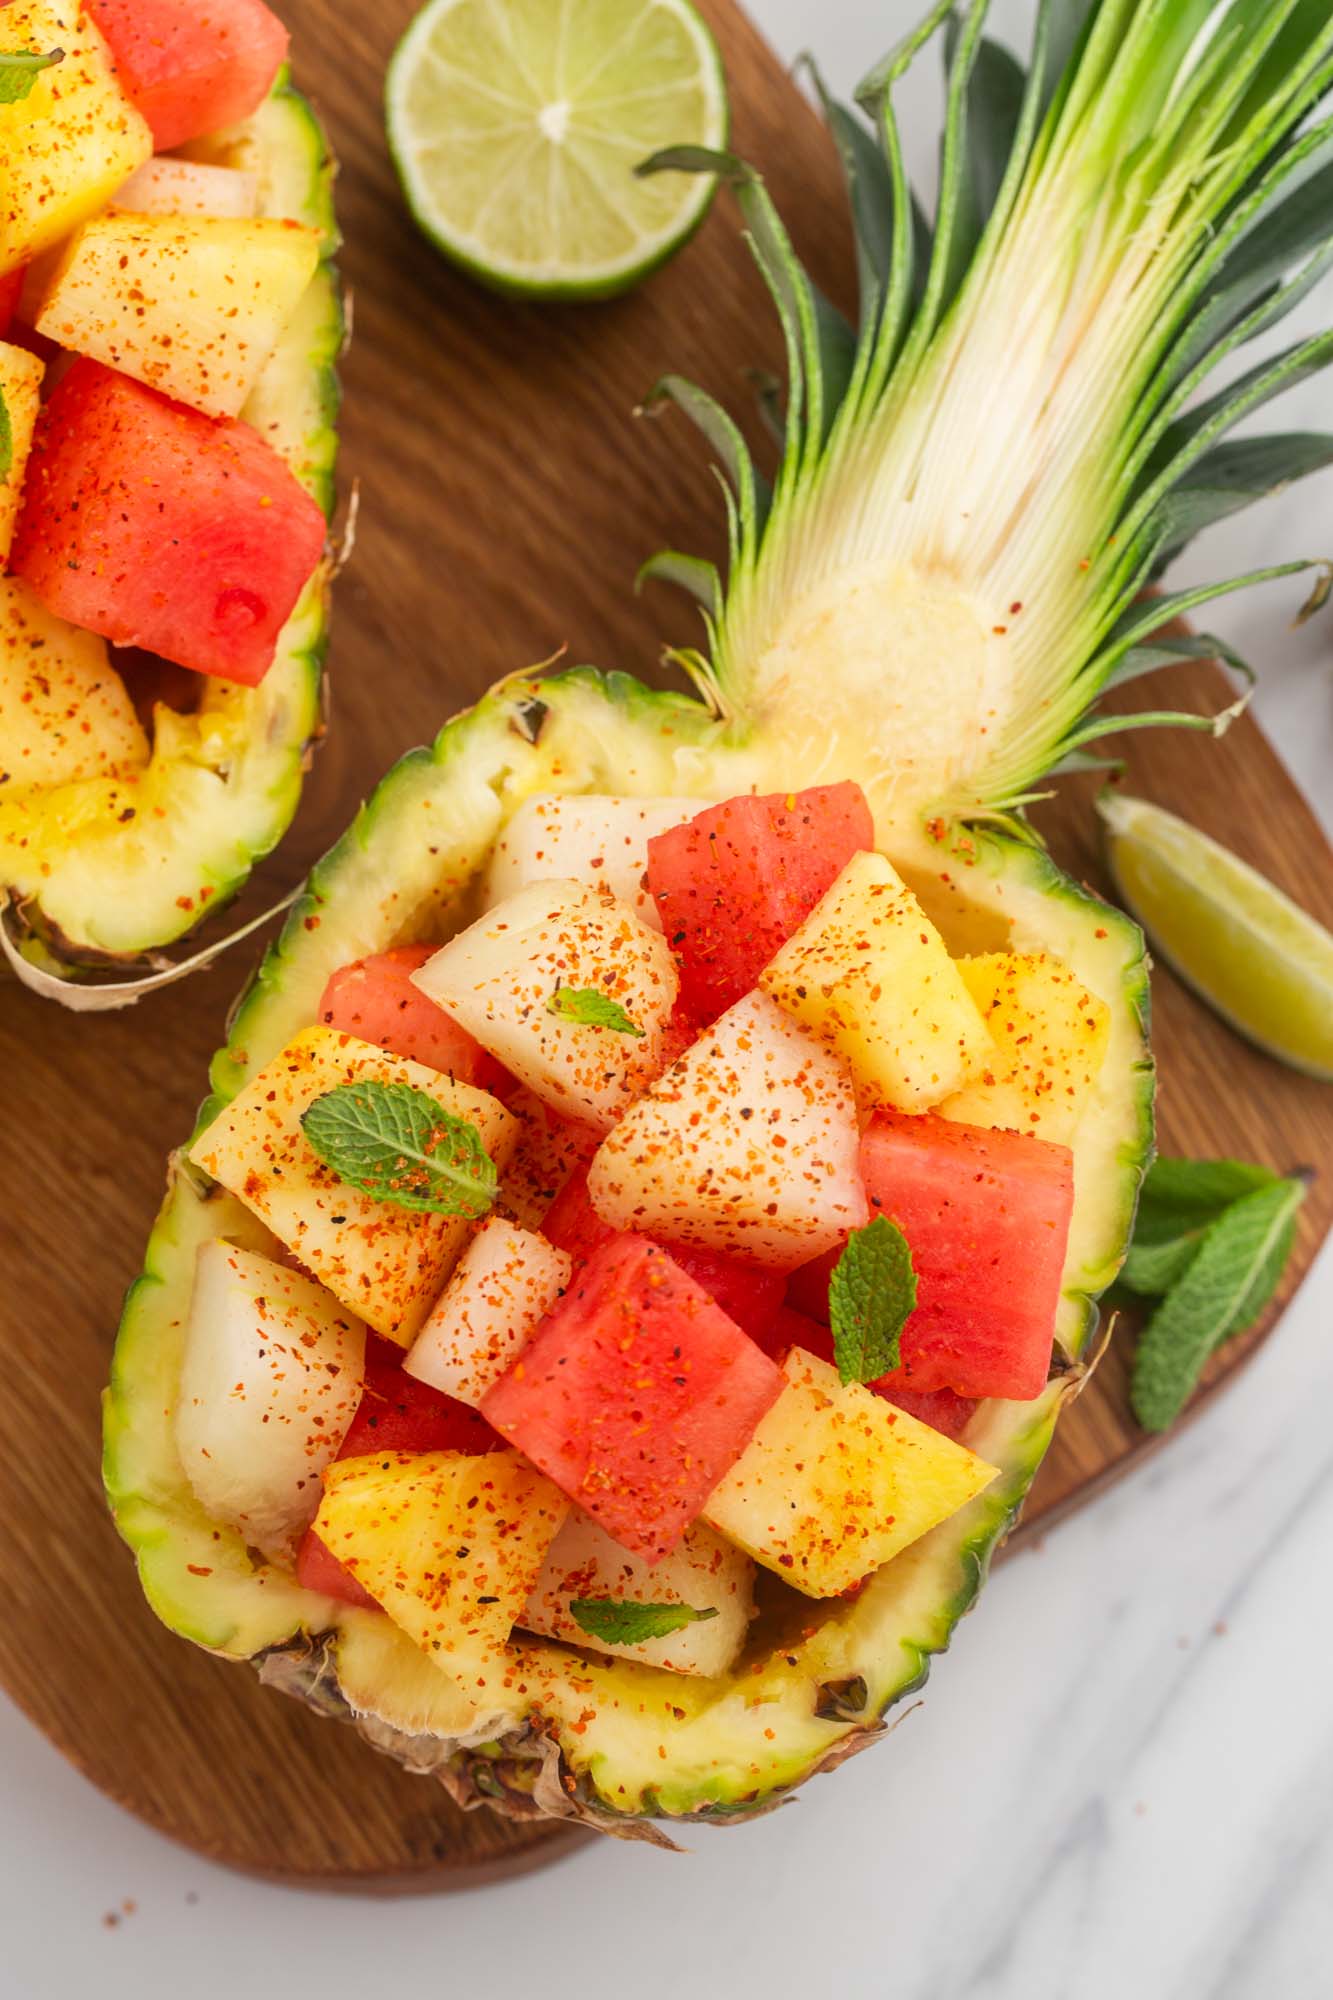 Mexican Fruit Salad served in a hollowed pineapple